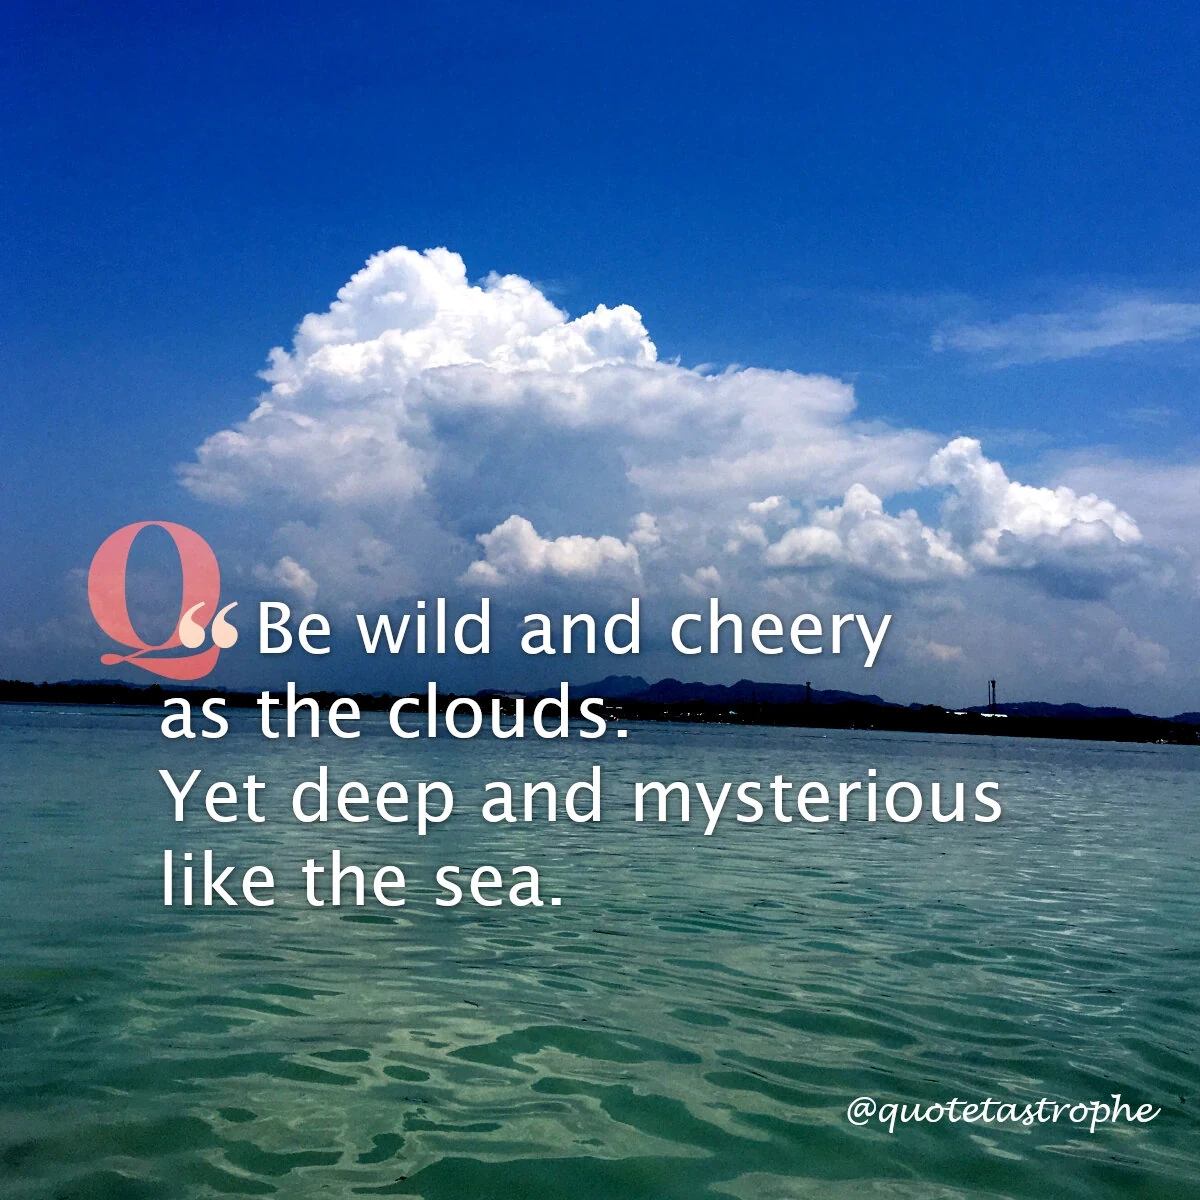 Be Wild and Cheery as the Clouds